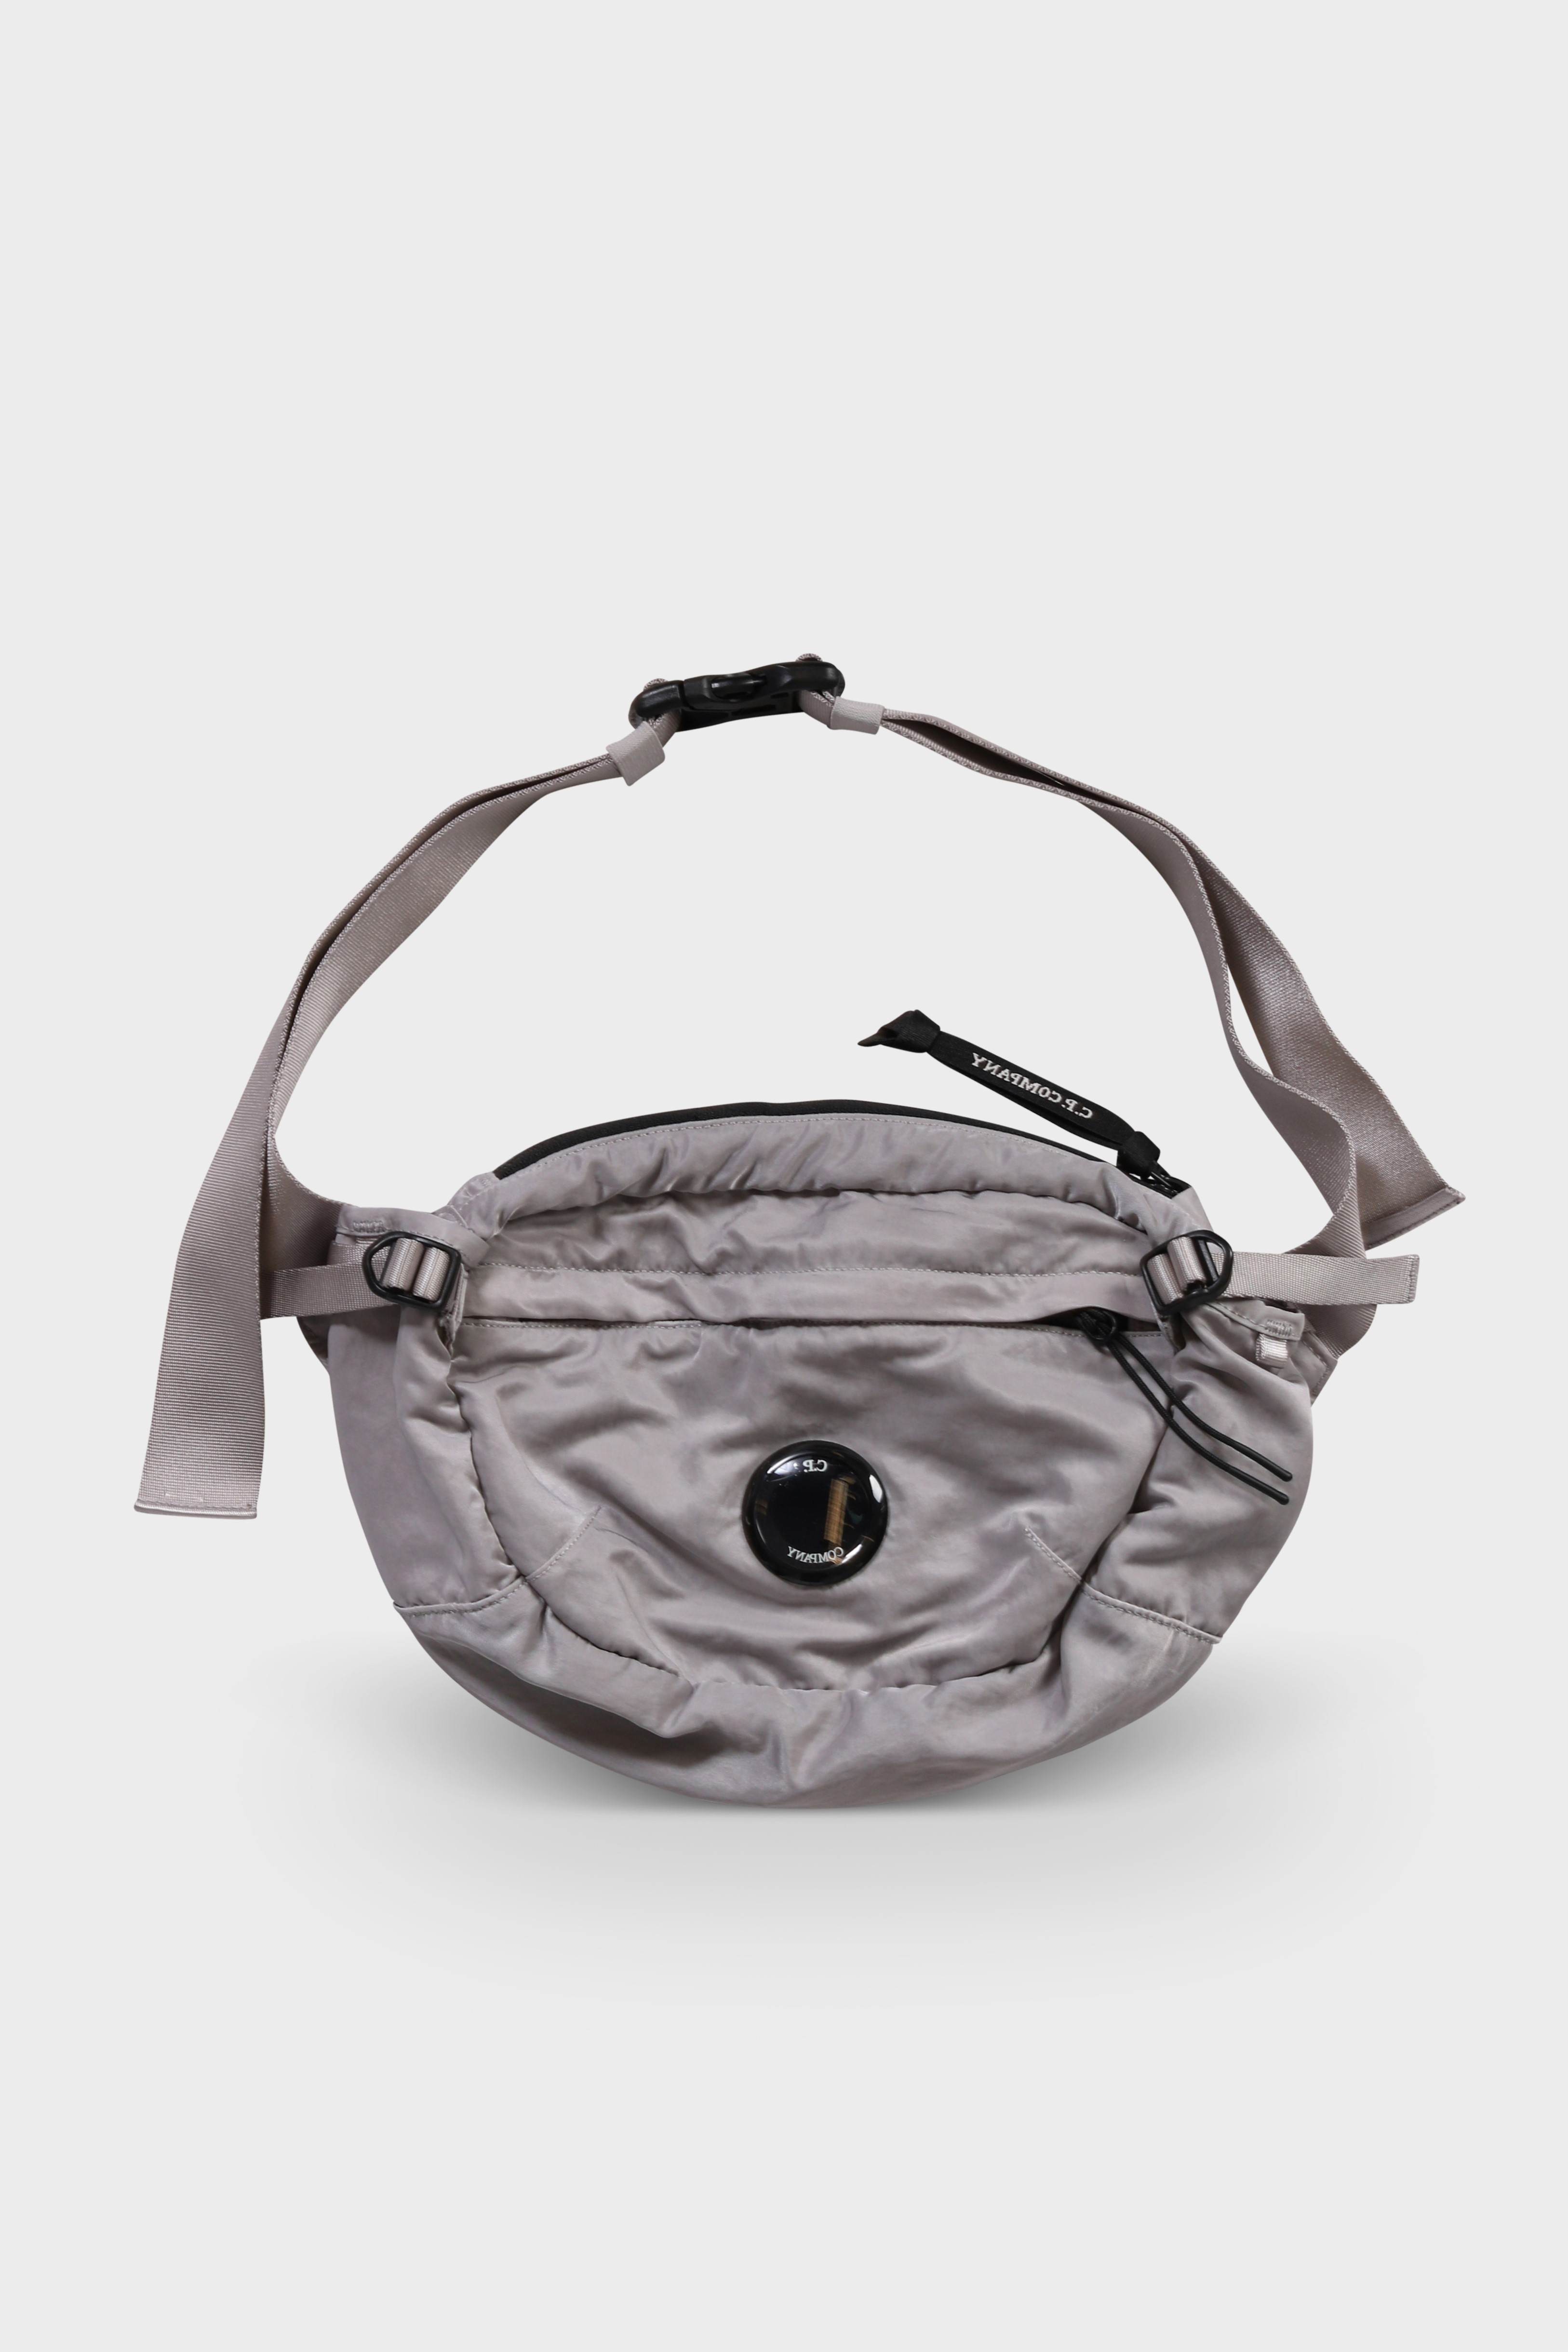 C.P. COMPANY Fanny Pack in Grey